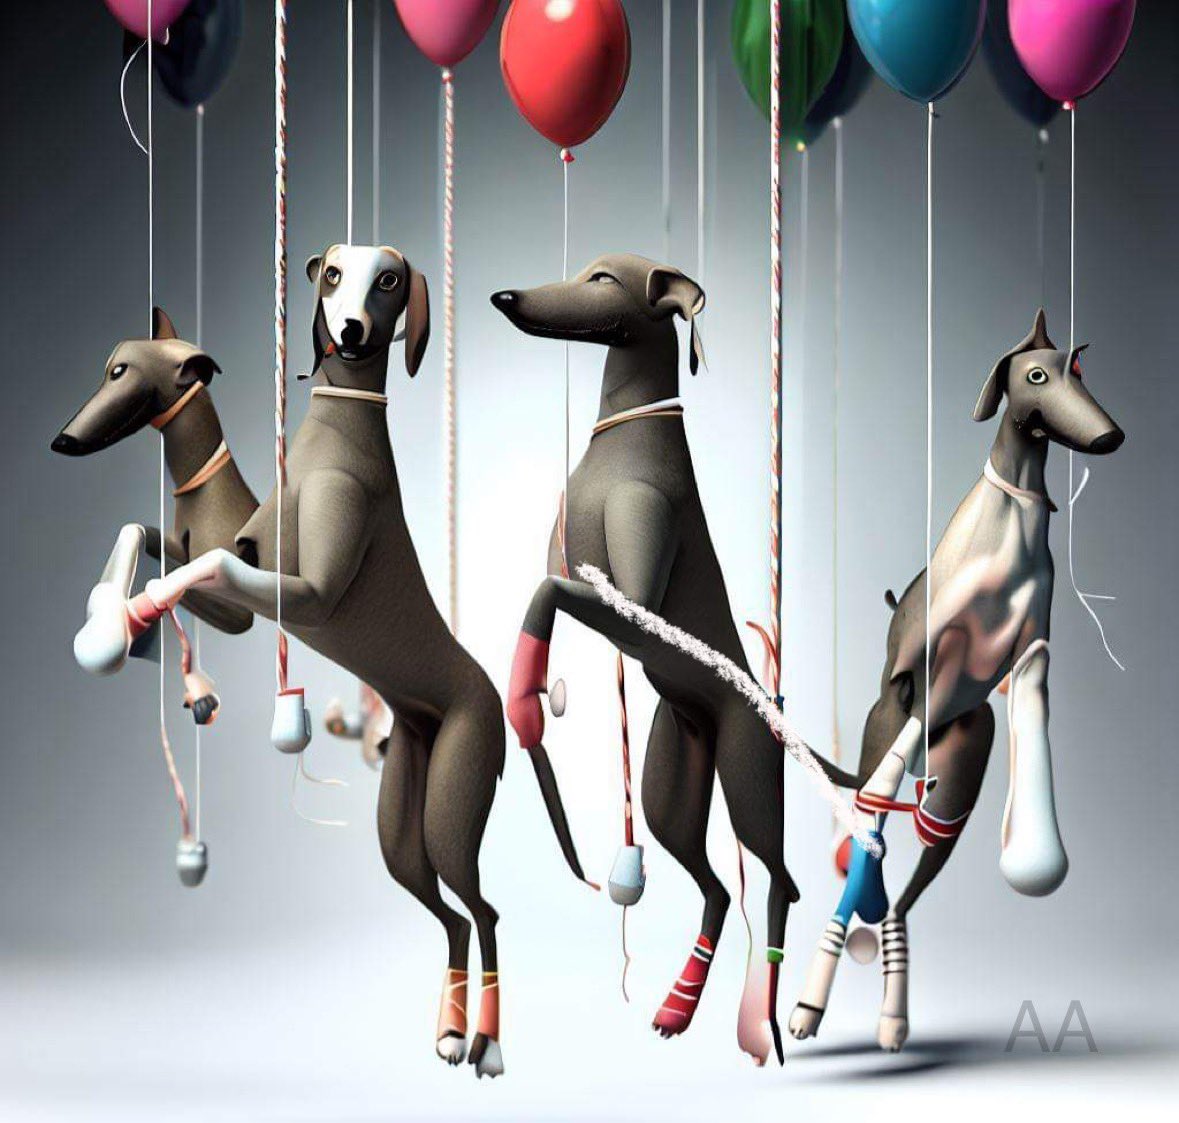 #NationalGreyhoundWeek

The racing industry damaging the legs of greyhounds for their celebrations.

AI art sent to us.

#greyhounds #rescuednotretired 
#Injured #bangreyhoundracing 
#cutthechase #unboundthehound